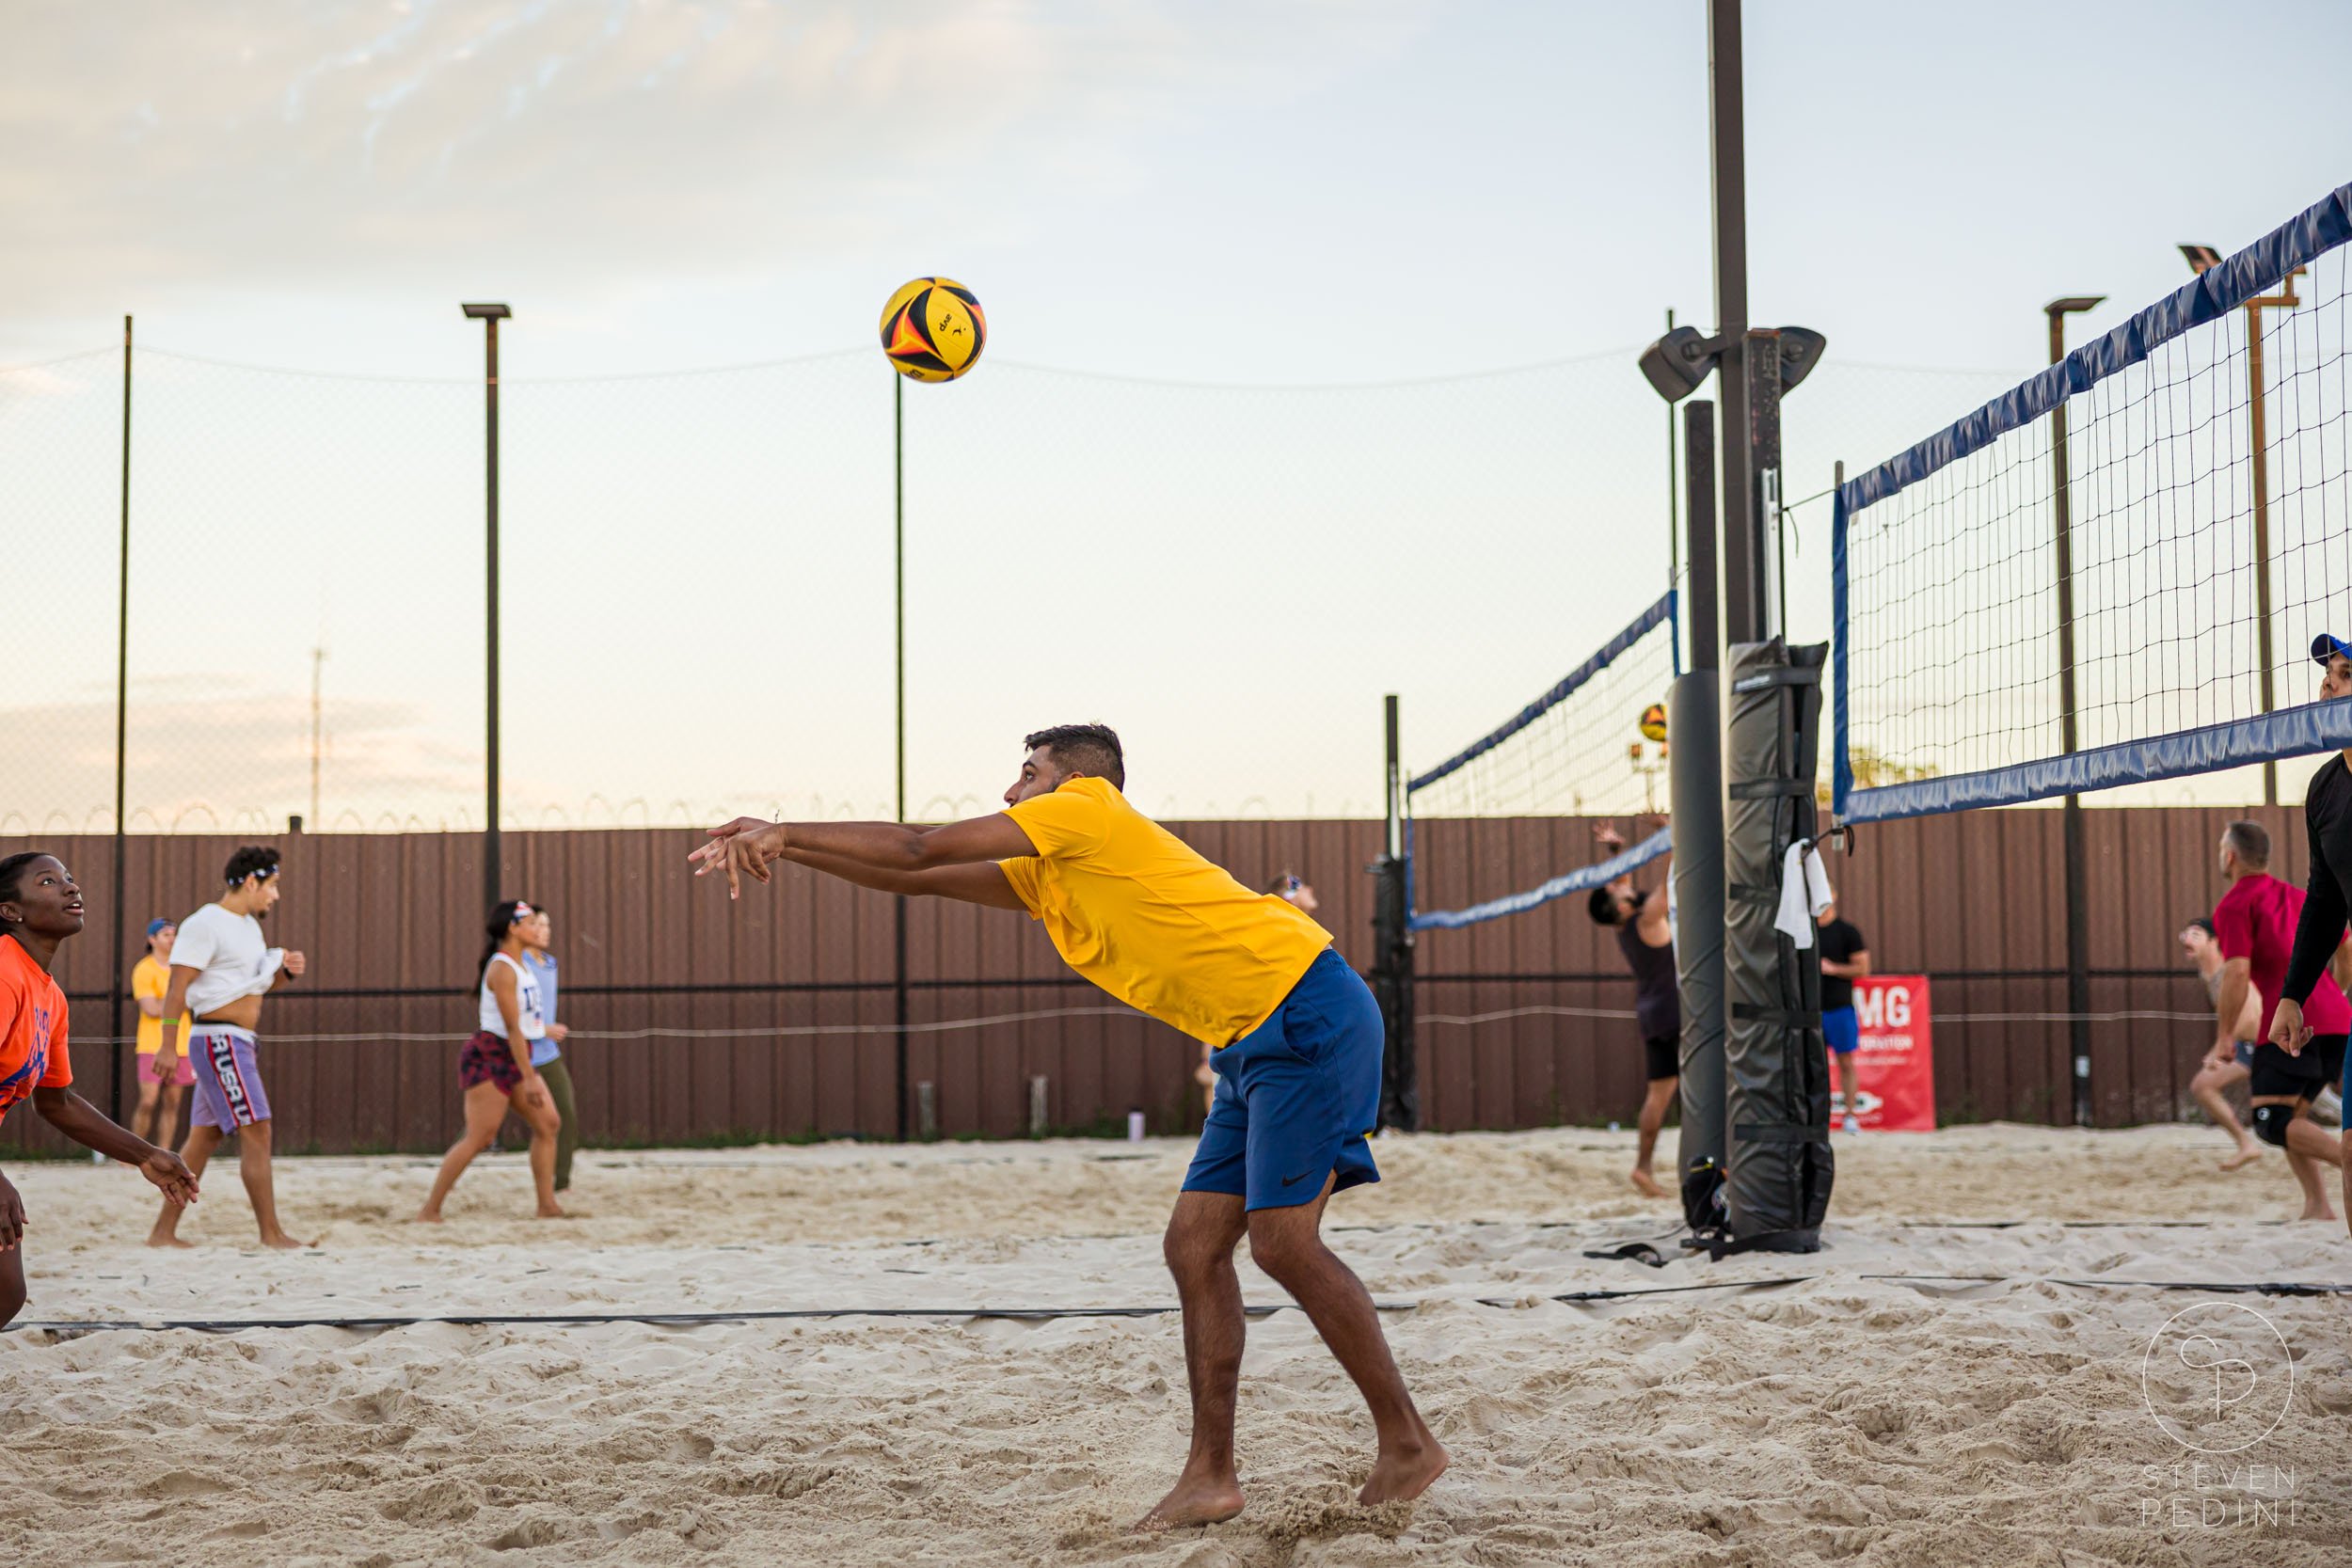 Steven Pedini Photography - Bumpy Pickle - Sand Volleyball - Houston TX - World Cup of Volleyball - 00224.jpg